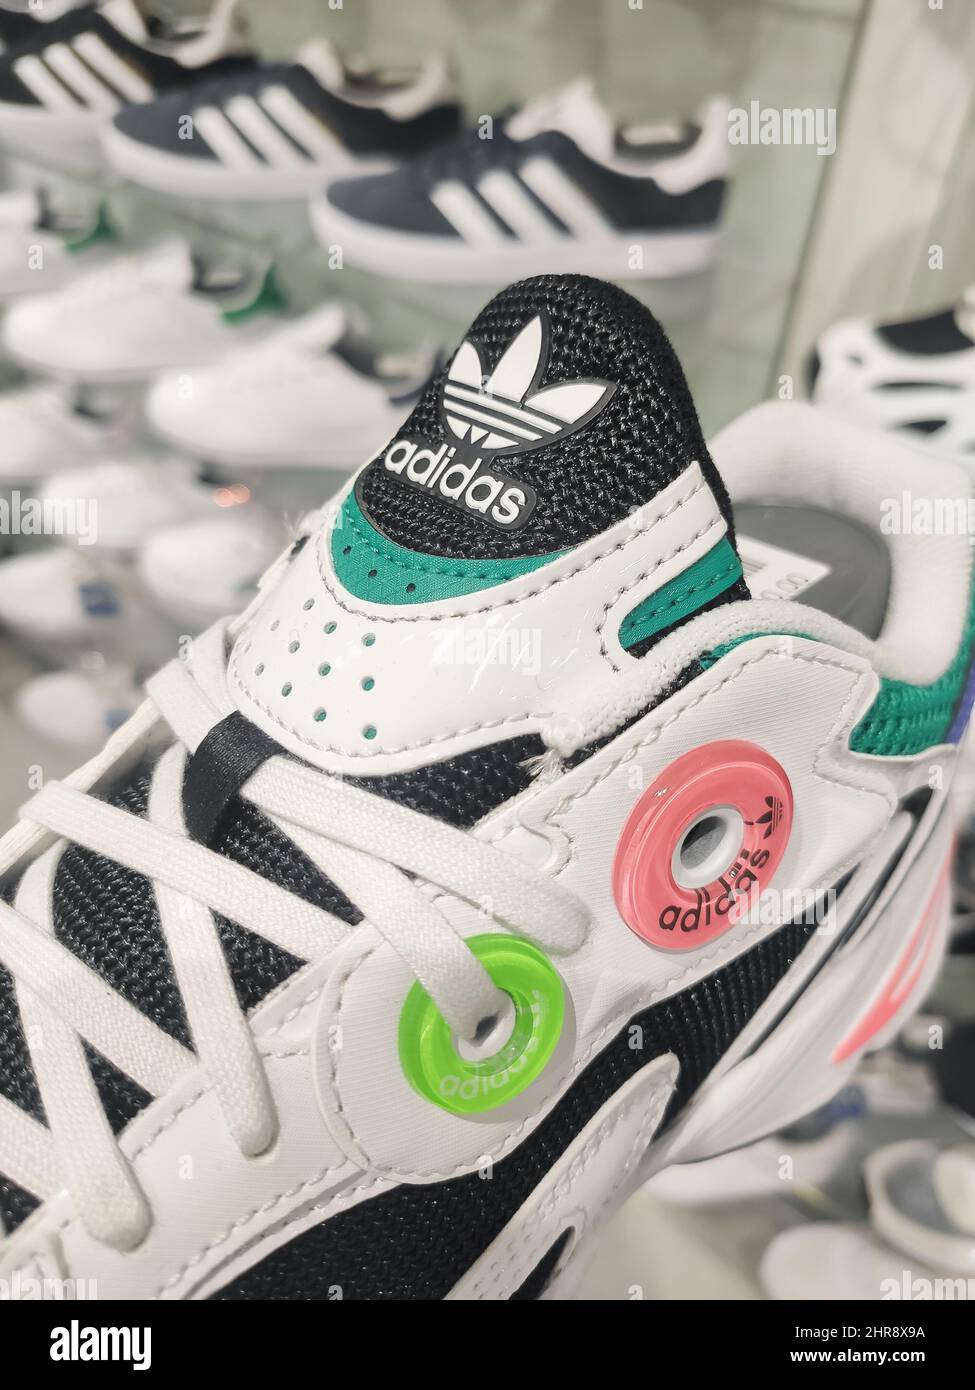 Zaragoza, February 14, 2022:View of new adidas sport shoes.Adidas sneakers  colorful vintage edition Stock Photo - Alamy